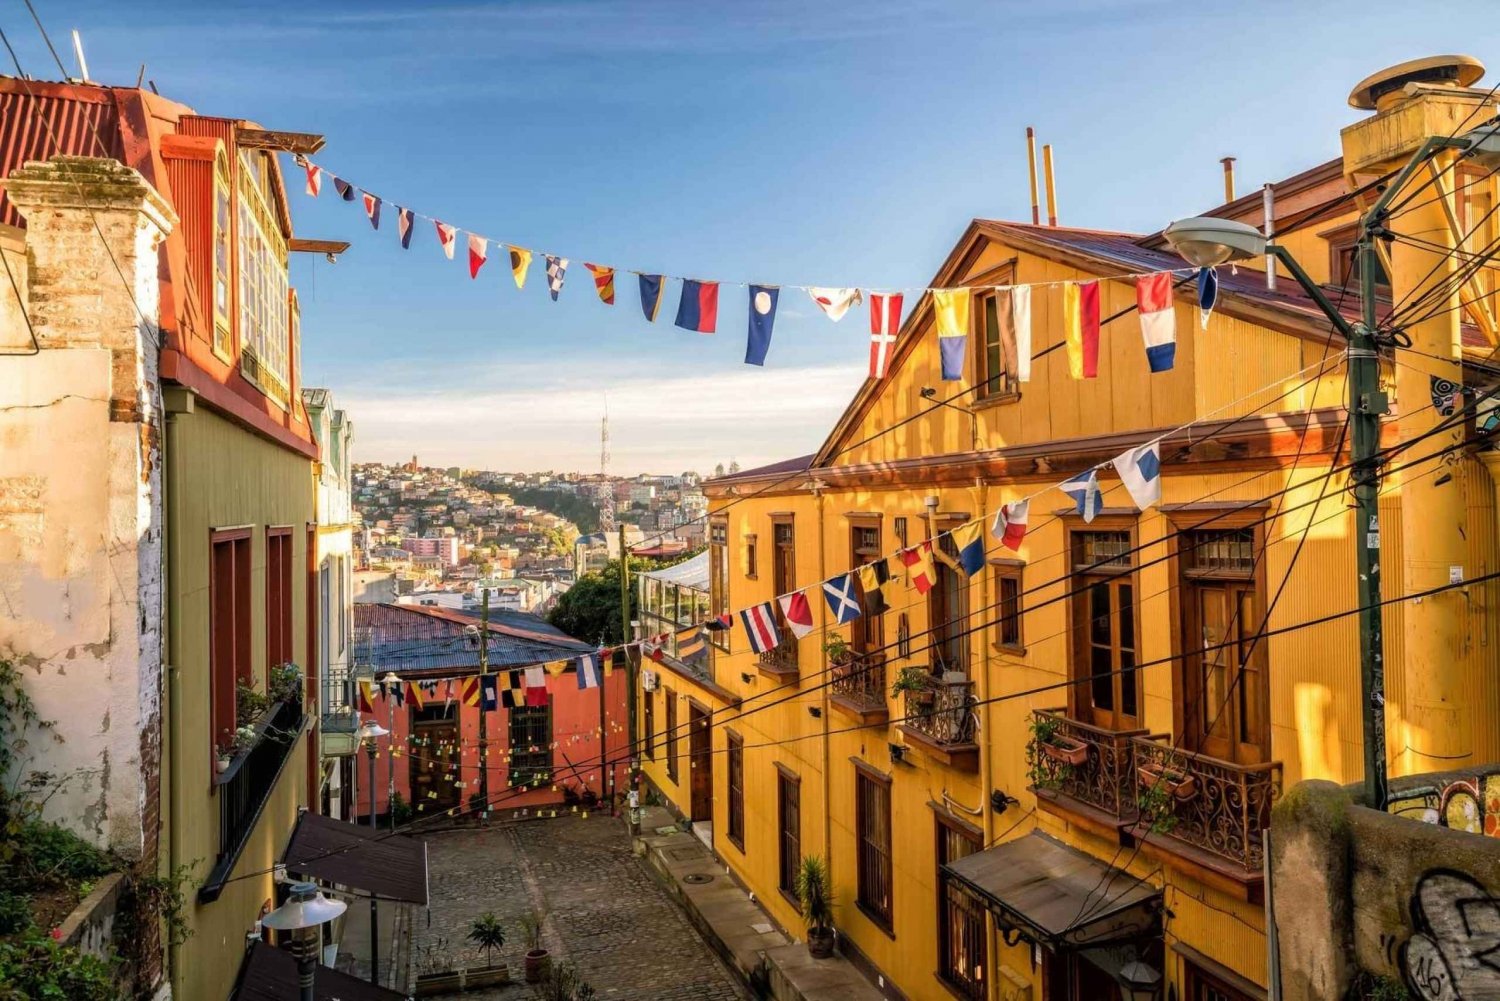 Valparaiso: Guided Walking Tour with Ascensor Rides